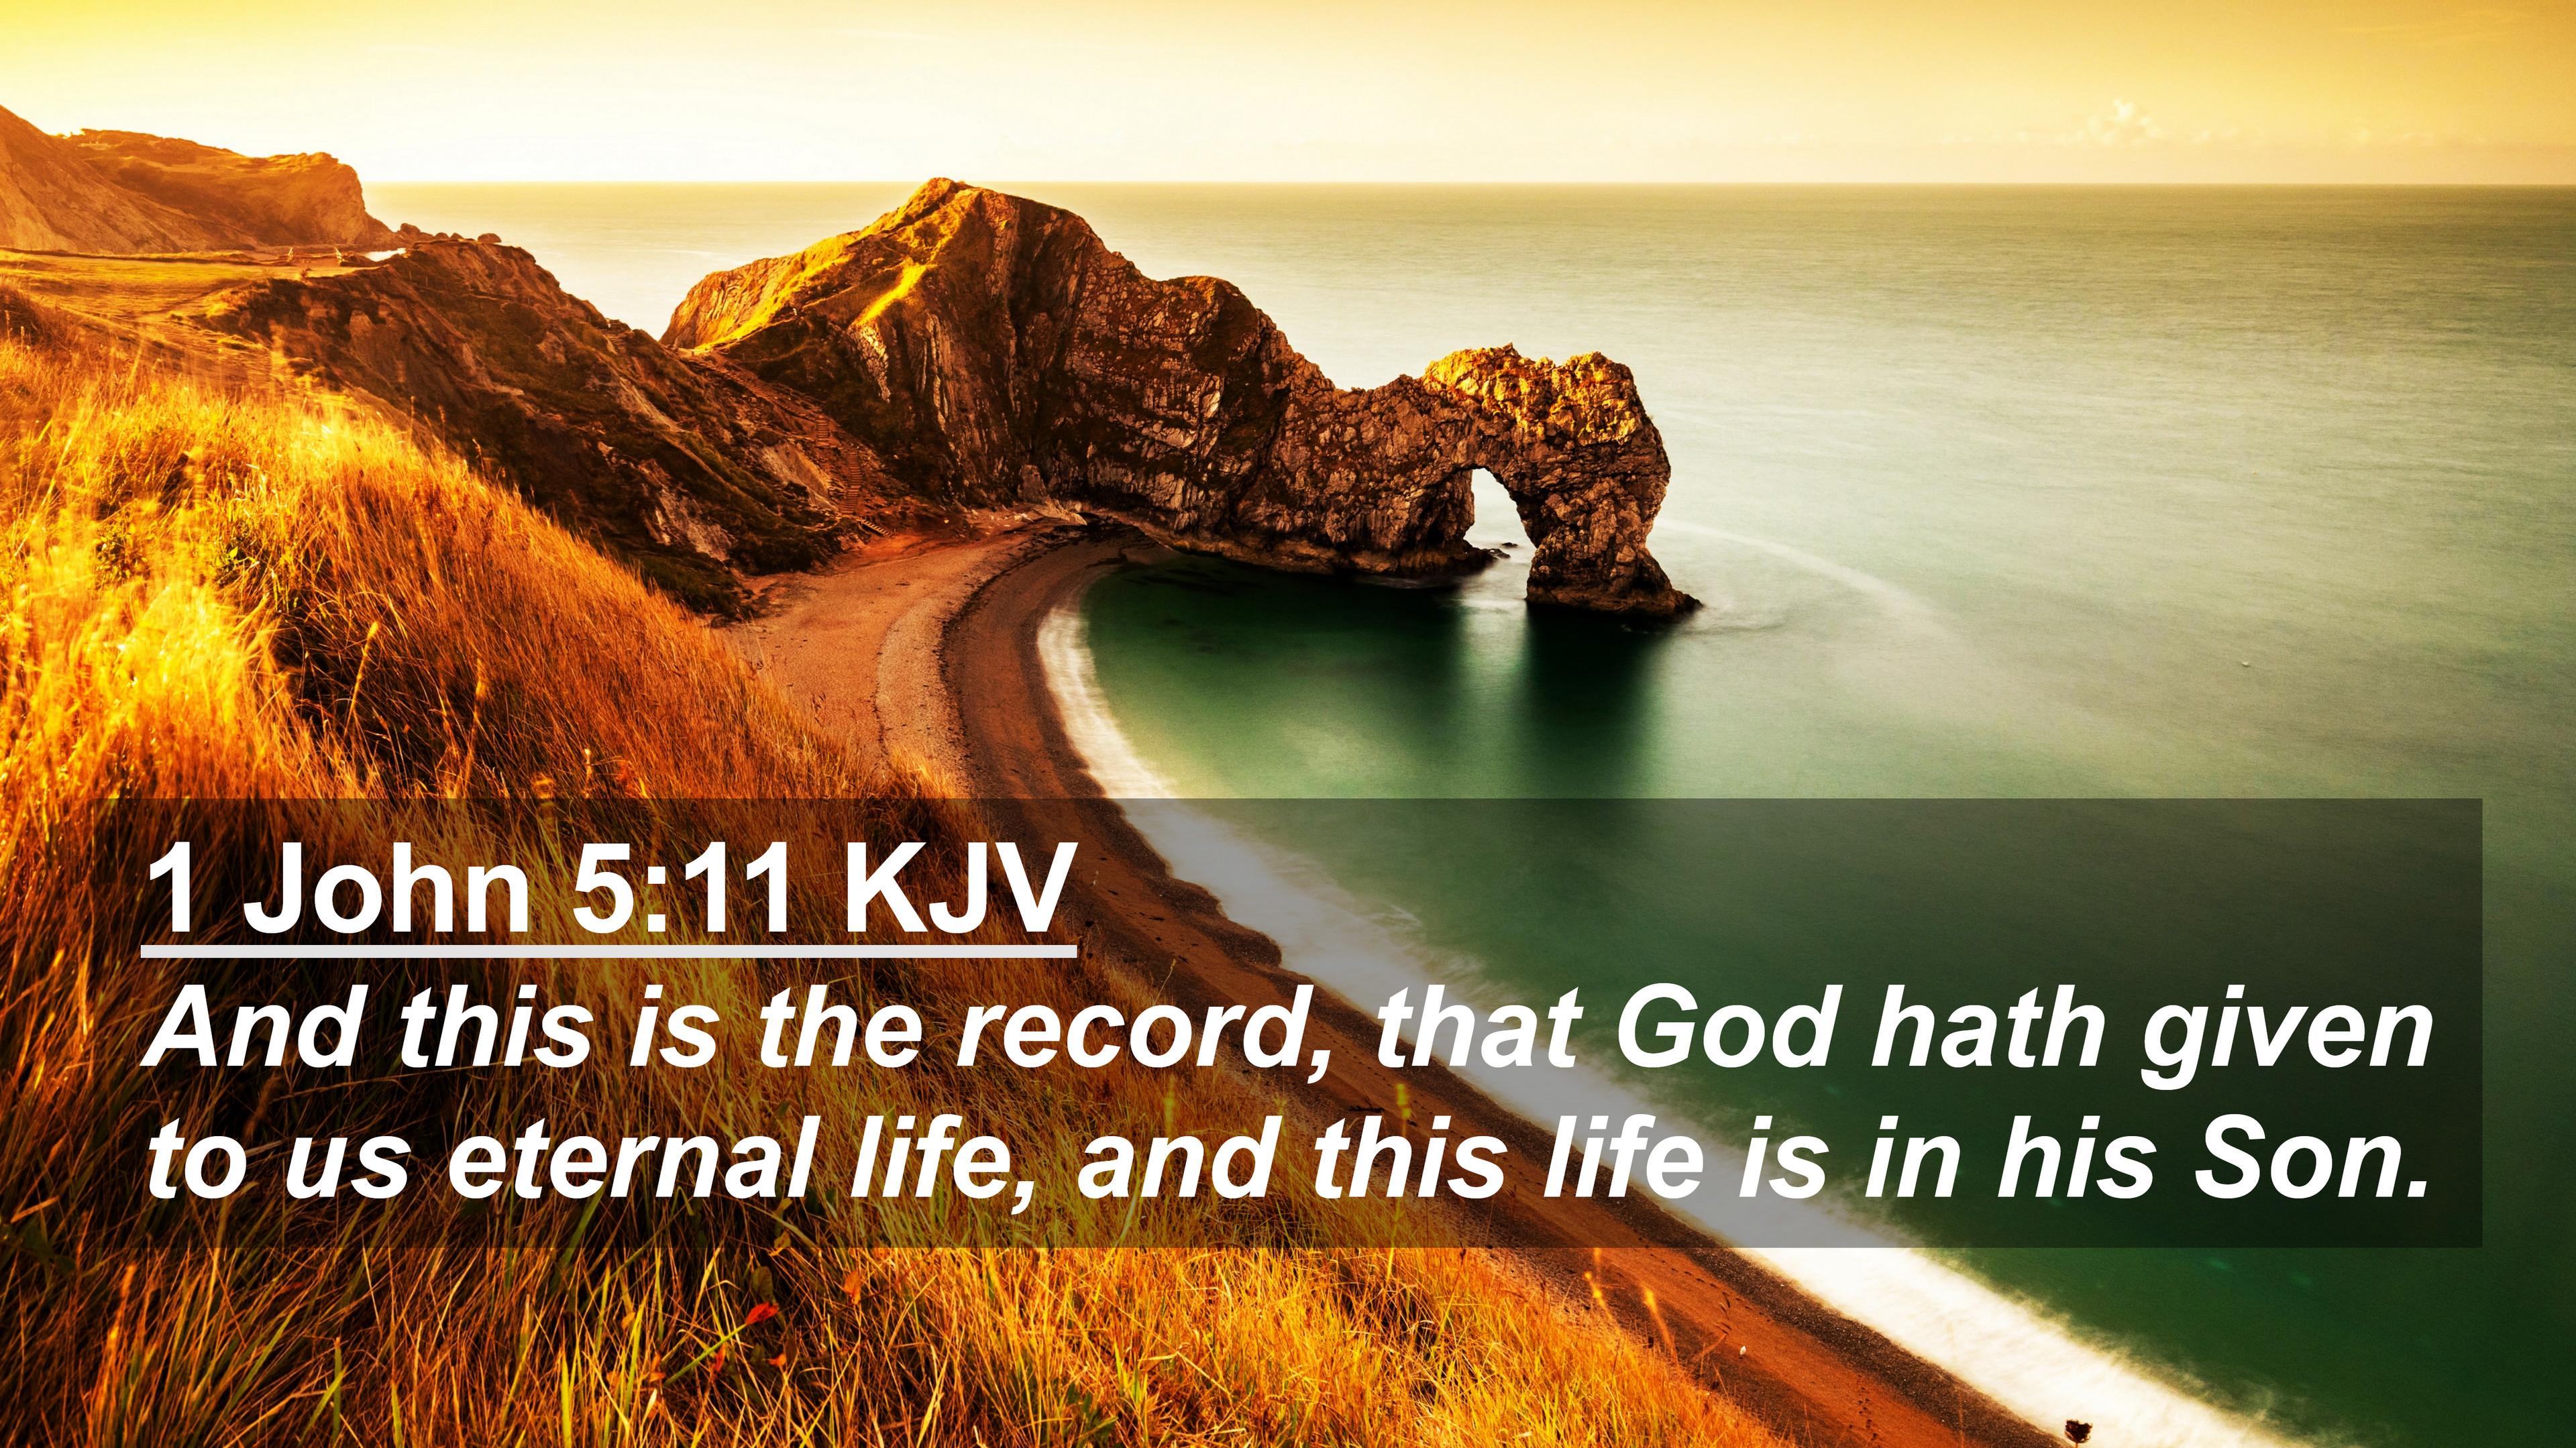 John Kjv 4k Wallpaper And This Is The Record That God